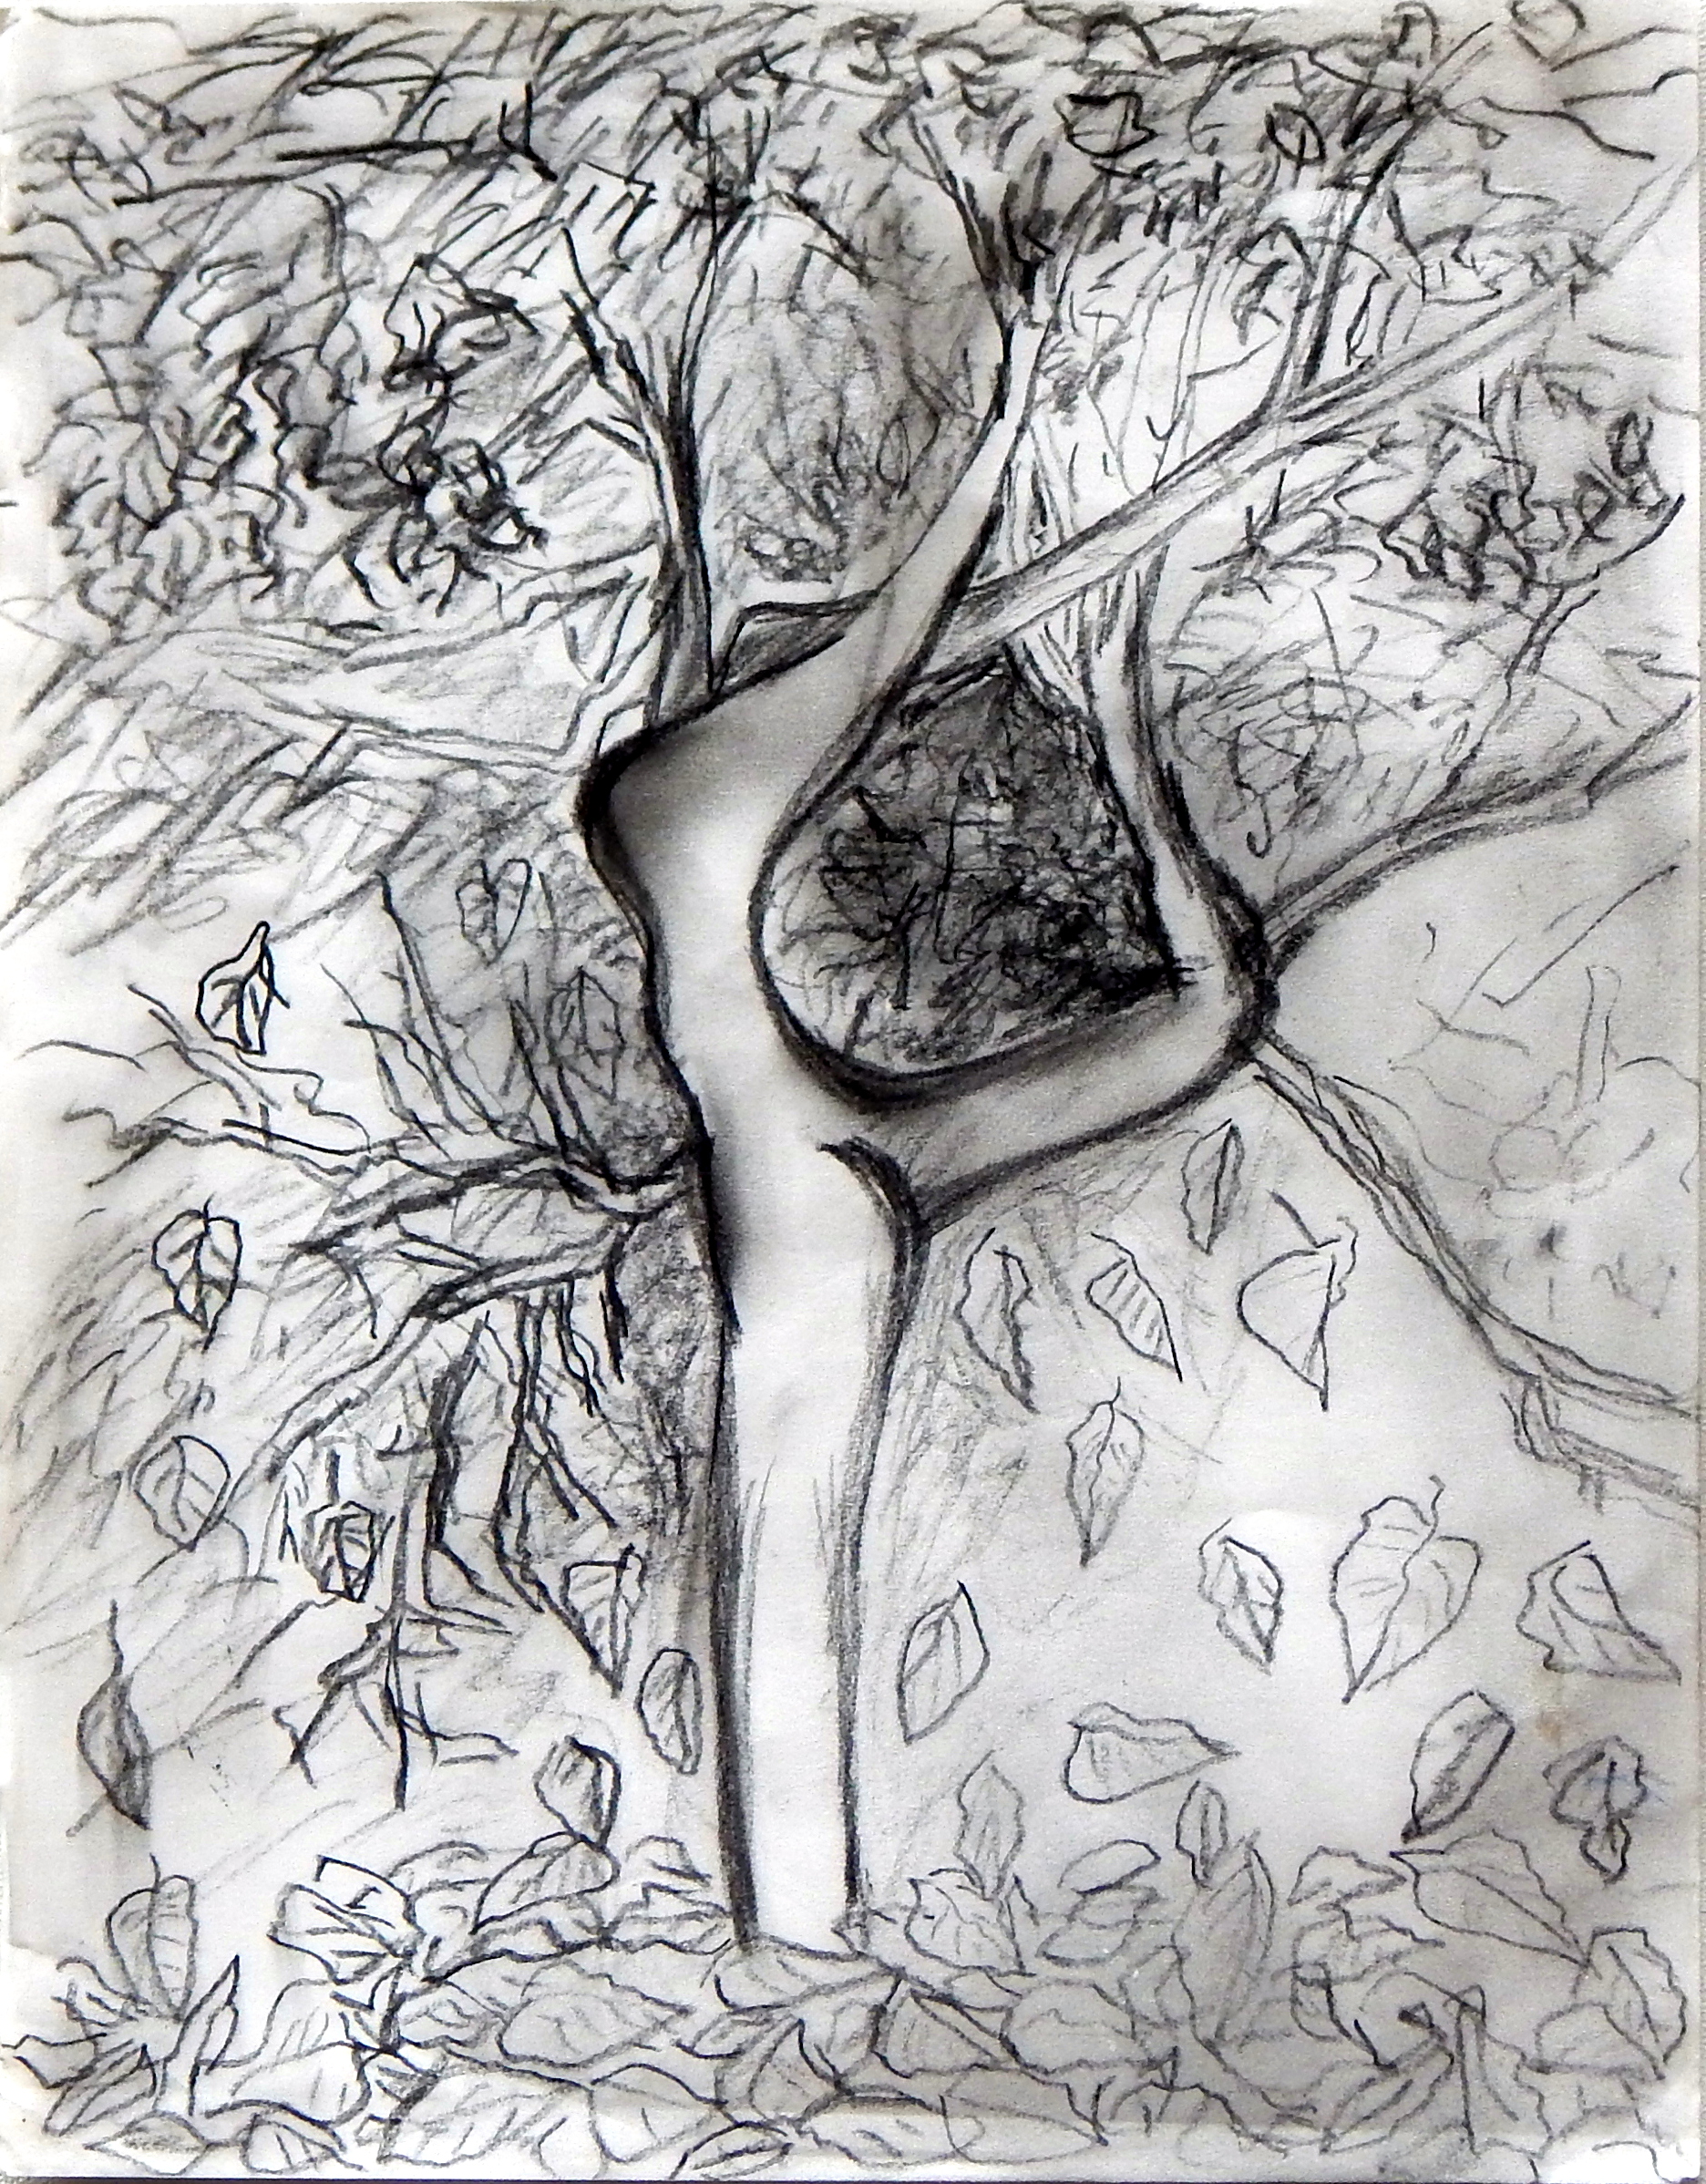 Tree, pencil and charcoal, 2012